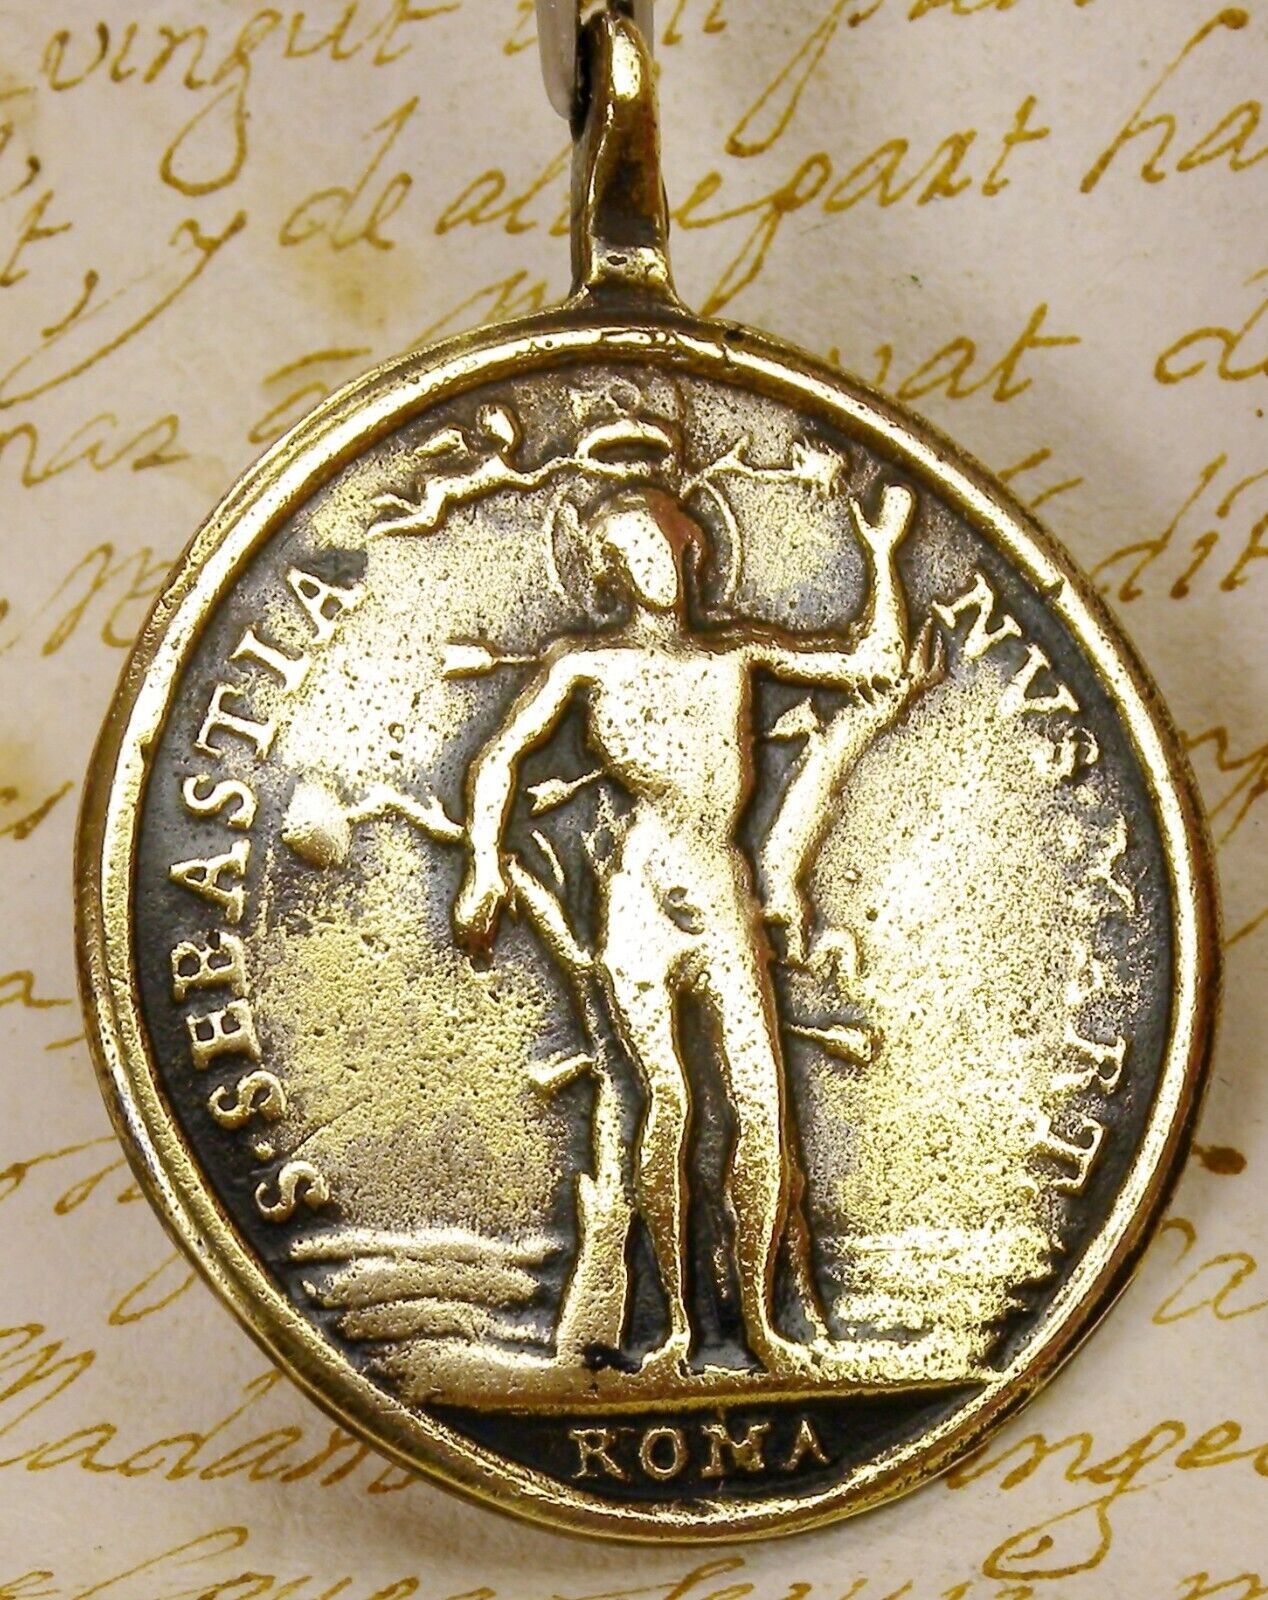 ANTIQUE 18TH CENTURY COLONIAL SOLDIERS ST. SEBASTIAN CHRIST PASSION BRONZE MEDAL